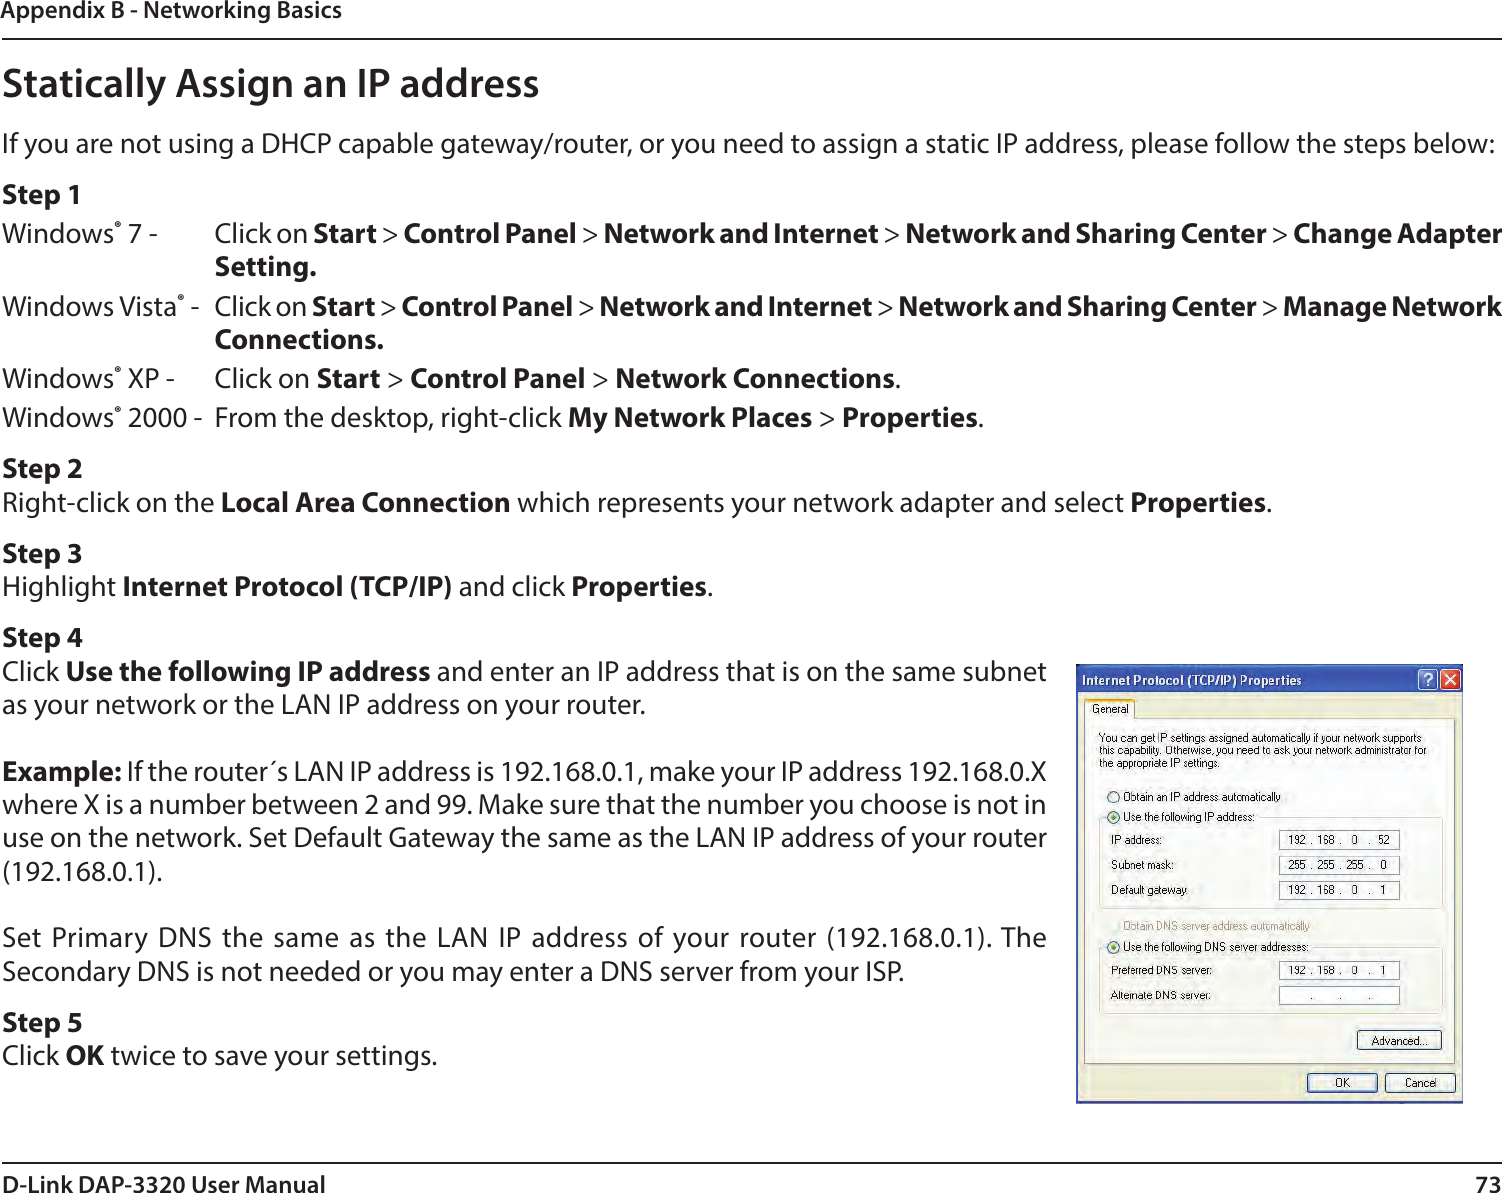 73D-Link DAP-3320 User ManualAppendix B - Networking BasicsStatically Assign an IP addressIf you are not using a DHCP capable gateway/router, or you need to assign a static IP address, please follow the steps below:Step 1Windows® 7 -  Click on Start &gt; Control Panel &gt; Network and Internet &gt; Network and Sharing Center &gt; Change Adapter Setting. Windows Vista® -  Click on Start &gt; Control Panel &gt; Network and Internet &gt; Network and Sharing Center &gt; Manage Network Connections.Windows® XP -  Click on Start &gt; Control Panel &gt; Network Connections.Windows® 2000 -  From the desktop, right-click My Network Places &gt; Properties.Step 2Right-click on the Local Area Connection which represents your network adapter and select Properties.Step 3Highlight Internet Protocol (TCP/IP) and click Properties.Step 4Click Use the following IP address and enter an IP address that is on the same subnet as your network or the LAN IP address on your router.Example: If the router´s LAN IP address is 192.168.0.1, make your IP address 192.168.0.X where X is a number between 2 and 99. Make sure that the number you choose is not in use on the network. Set Default Gateway the same as the LAN IP address of your router (192.168.0.1). Set Primary DNS the same as the LAN IP address of your router (192.168.0.1). The Secondary DNS is not needed or you may enter a DNS server from your ISP.Step 5Click OK twice to save your settings.